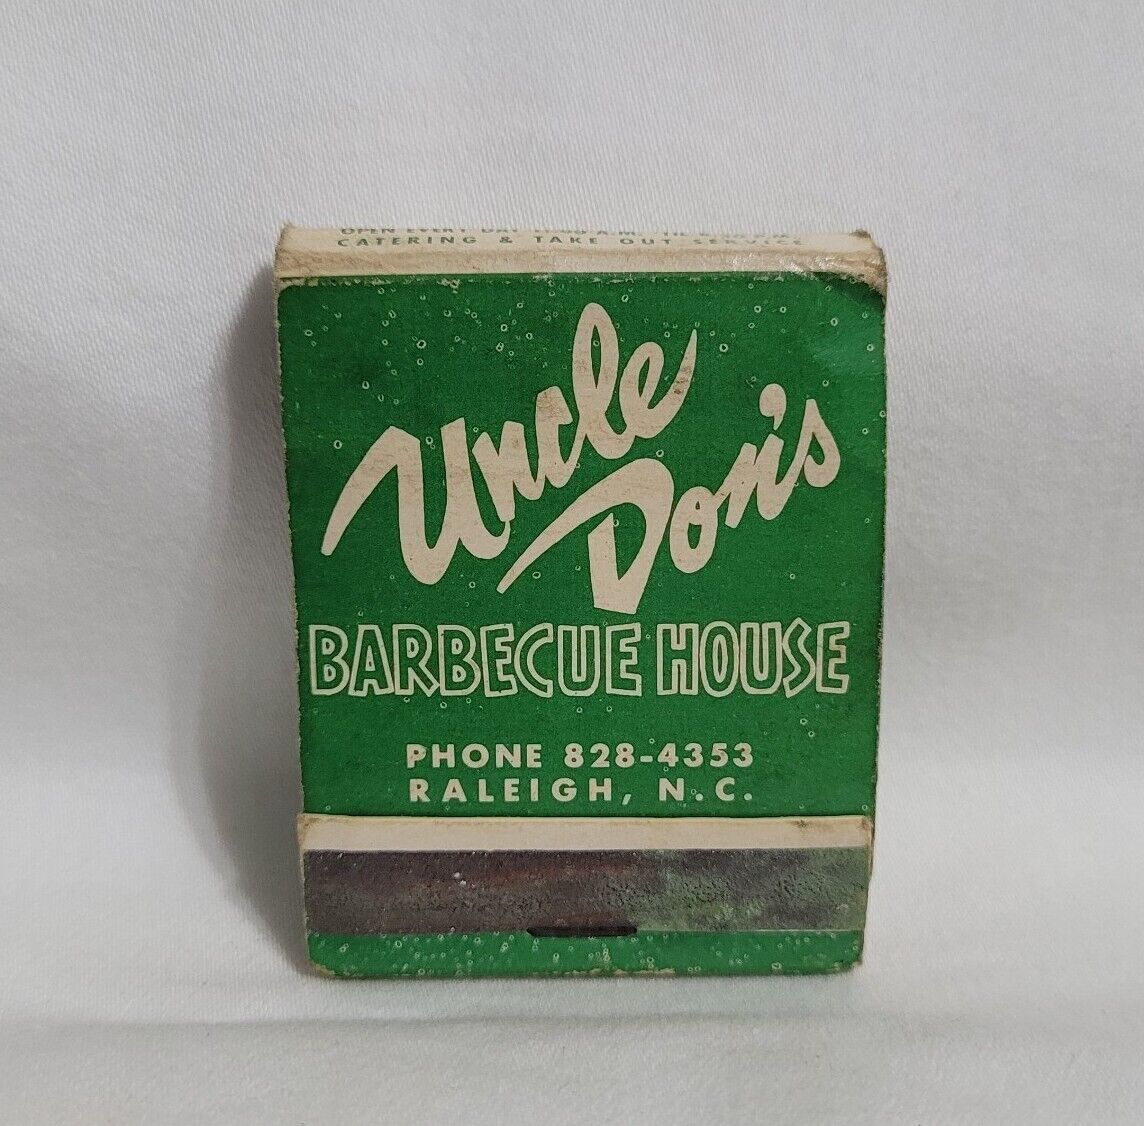 Vintage Uncle Don\'s Barbecue House Restaurant Matchbook Raleigh NC Advertising